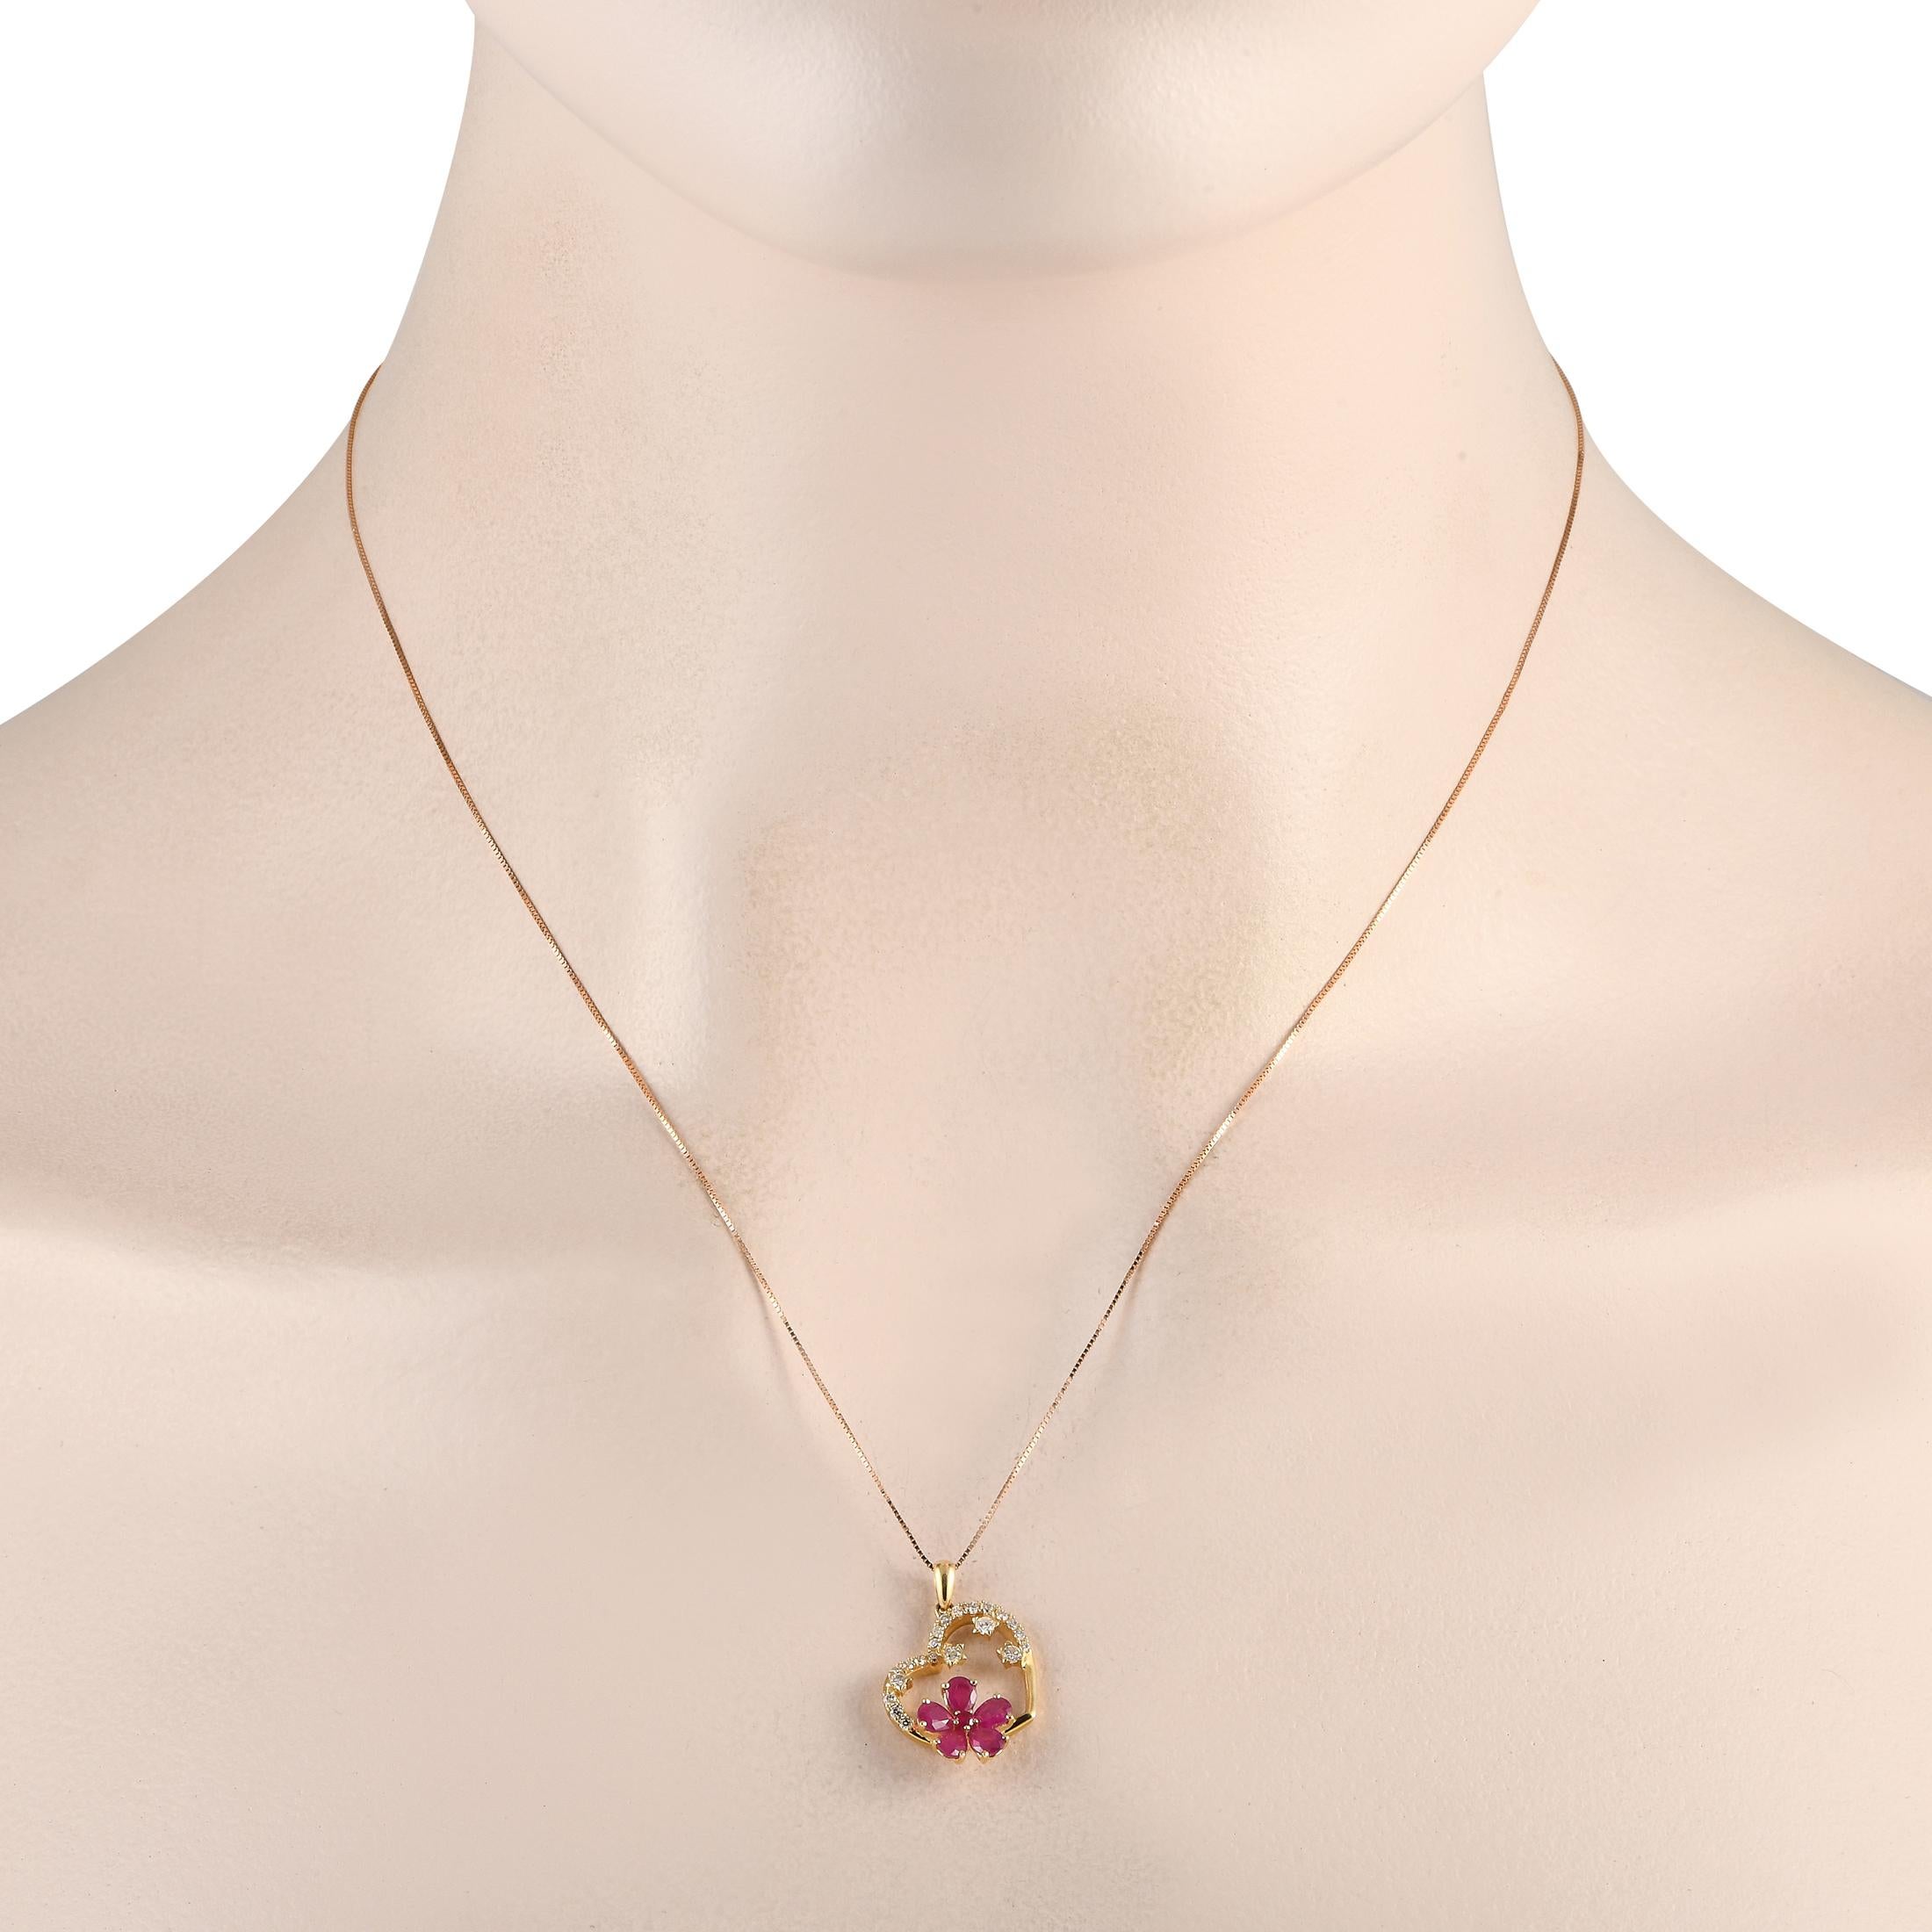 It doesnt get any more charming than this exquisite necklace. This pieces heart-shaped pendant  which measures 0.85 long by 0.65 wide  is elegantly adorned with sparkling Diamonds totaling 0.20 carats and radiant Ruby gemstones in a floral motif.